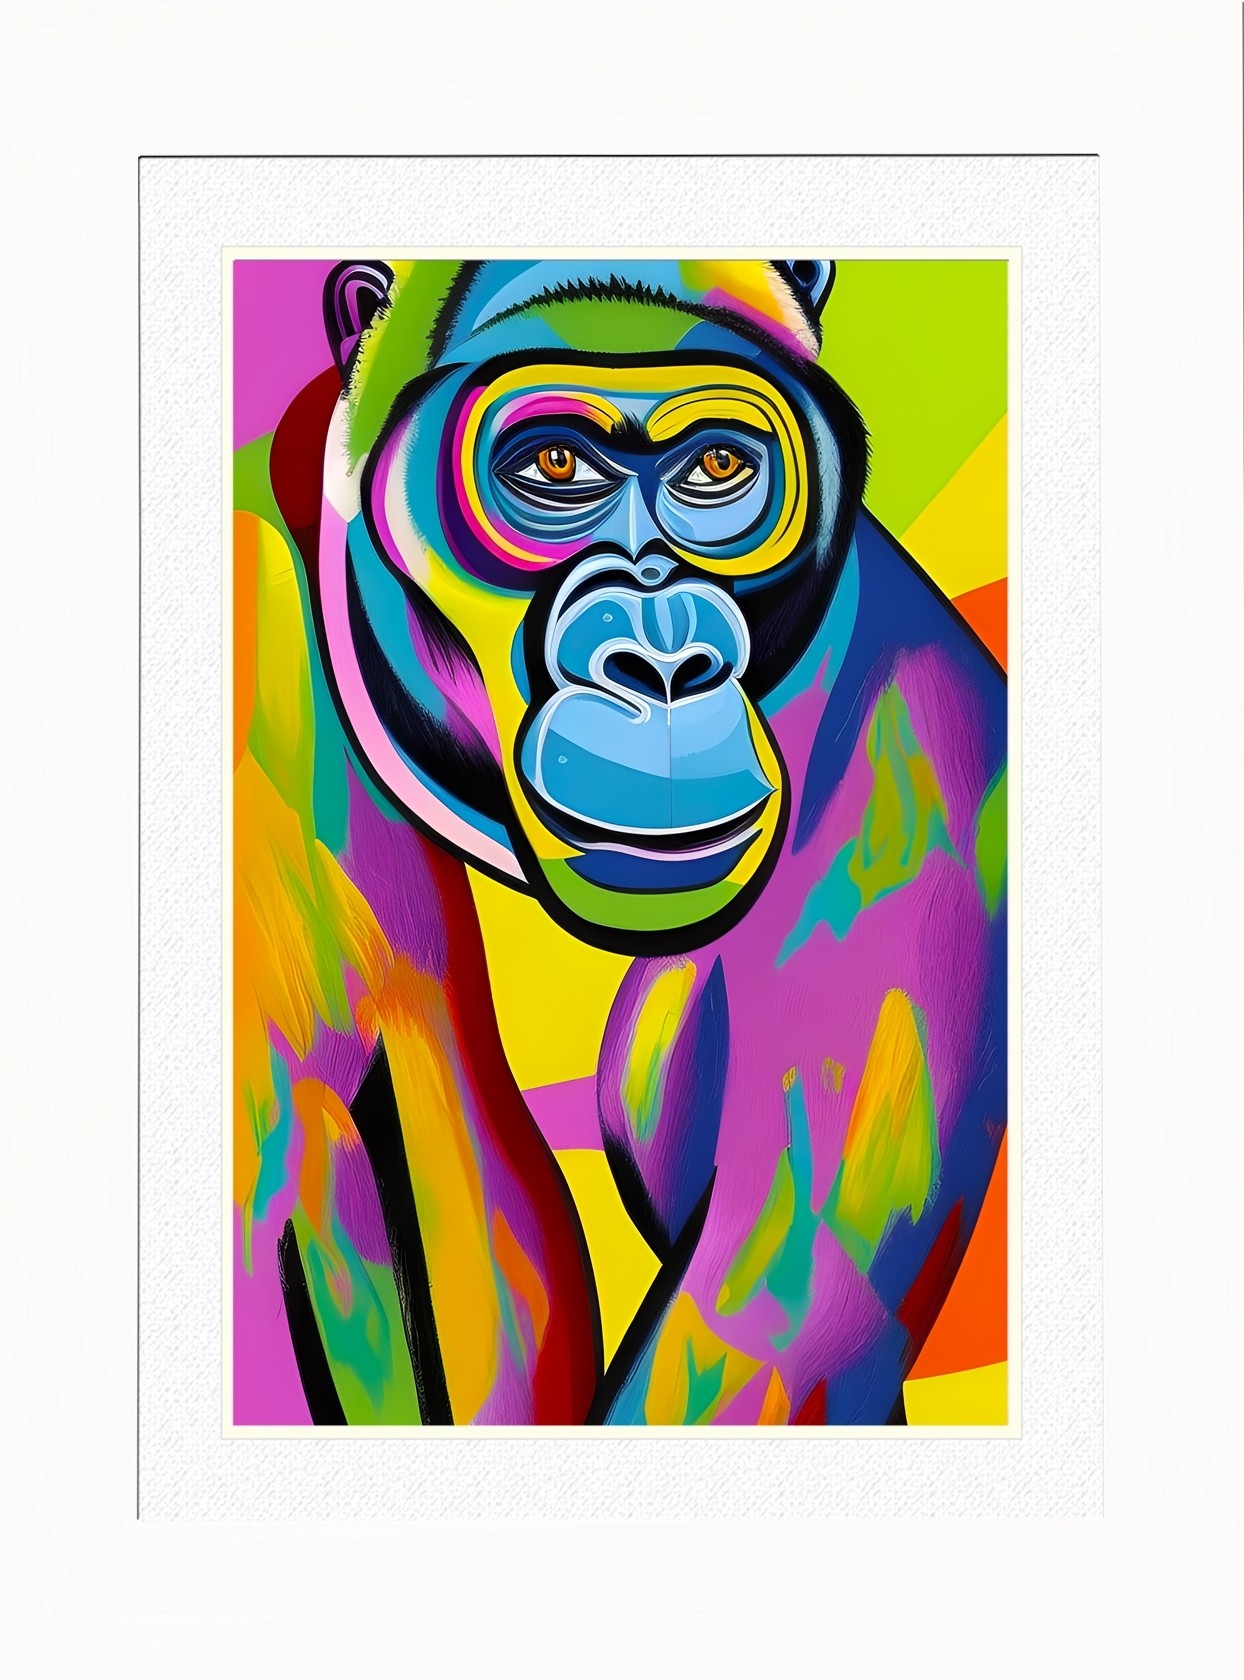 Monkey Chimpanzee Animal Picture Framed Colourful Abstract Art (A3 White Frame)